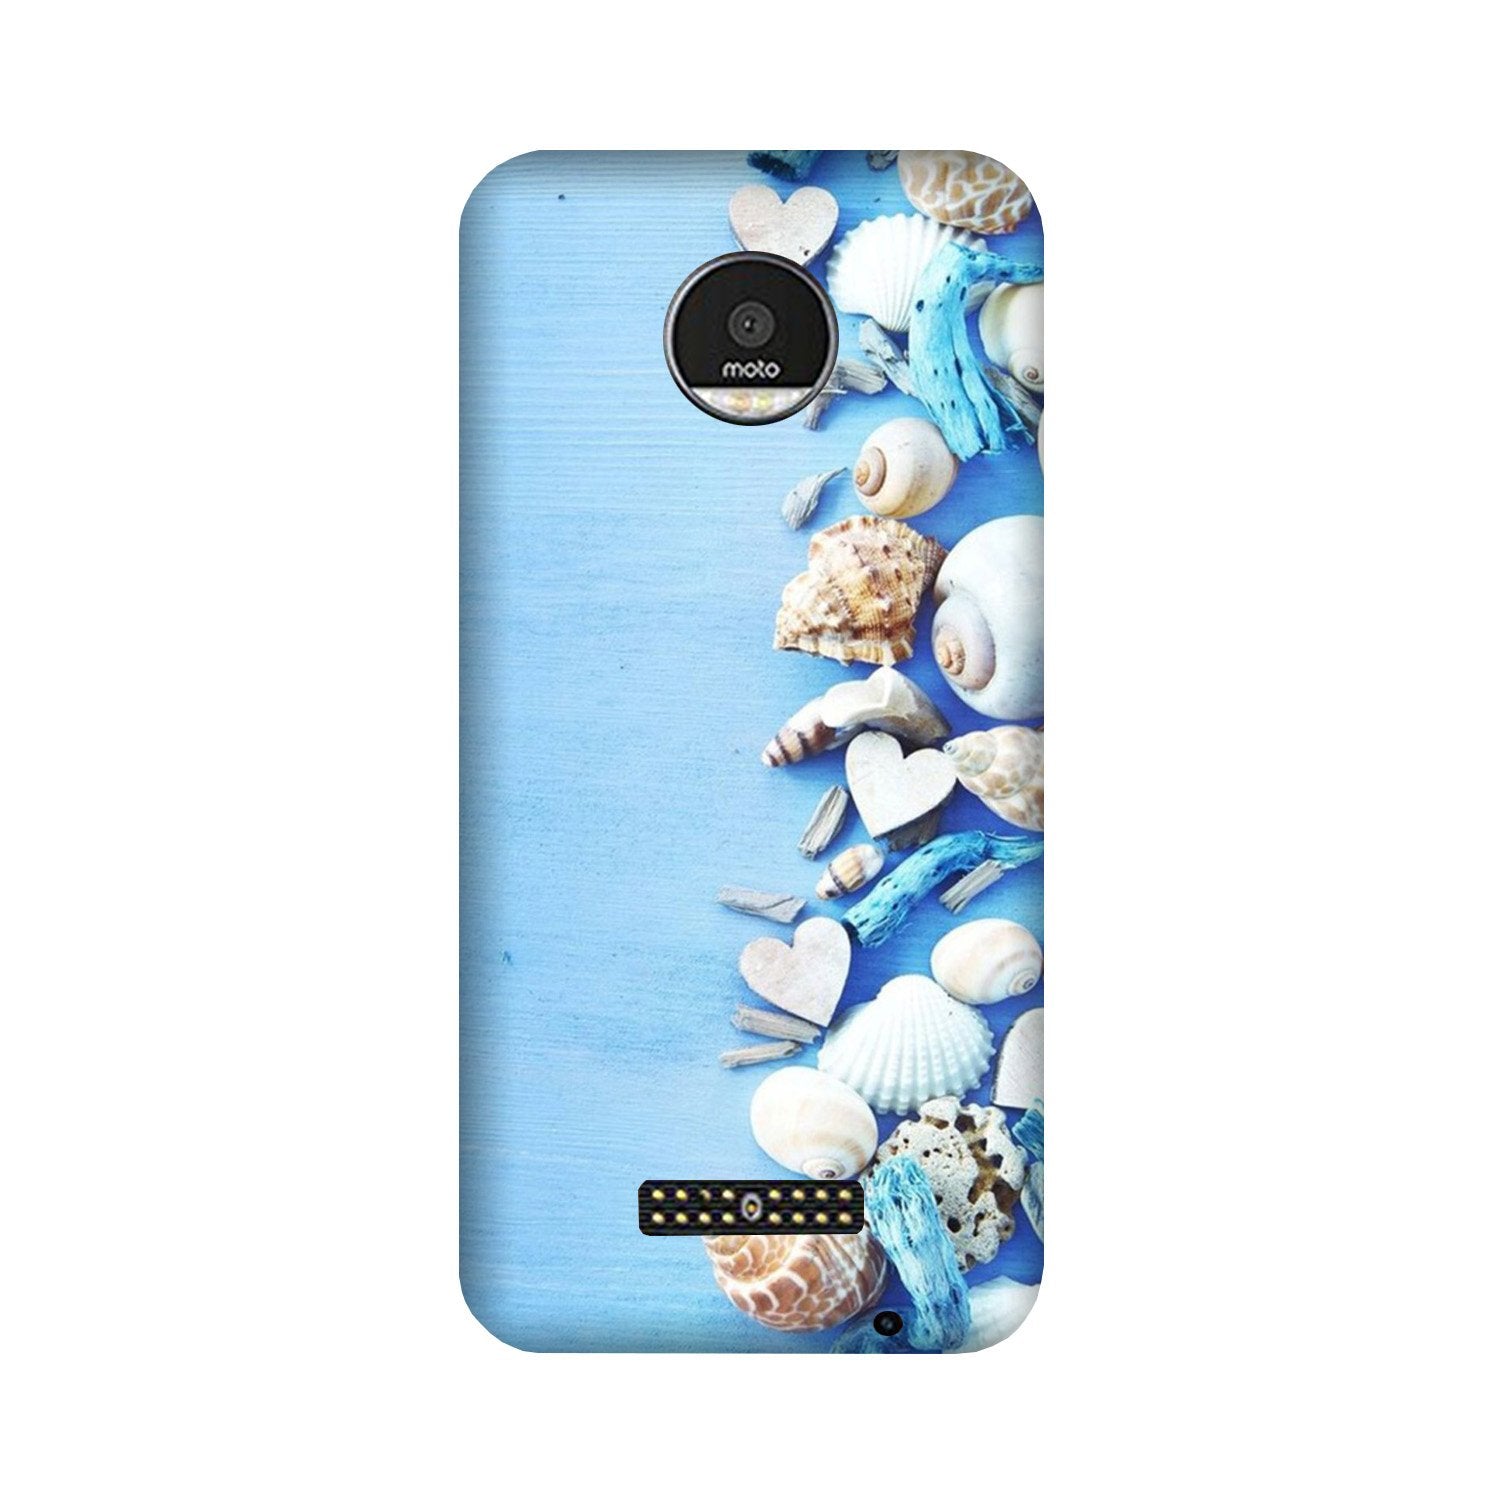 Sea Shells2 Case for Moto Z2 Play